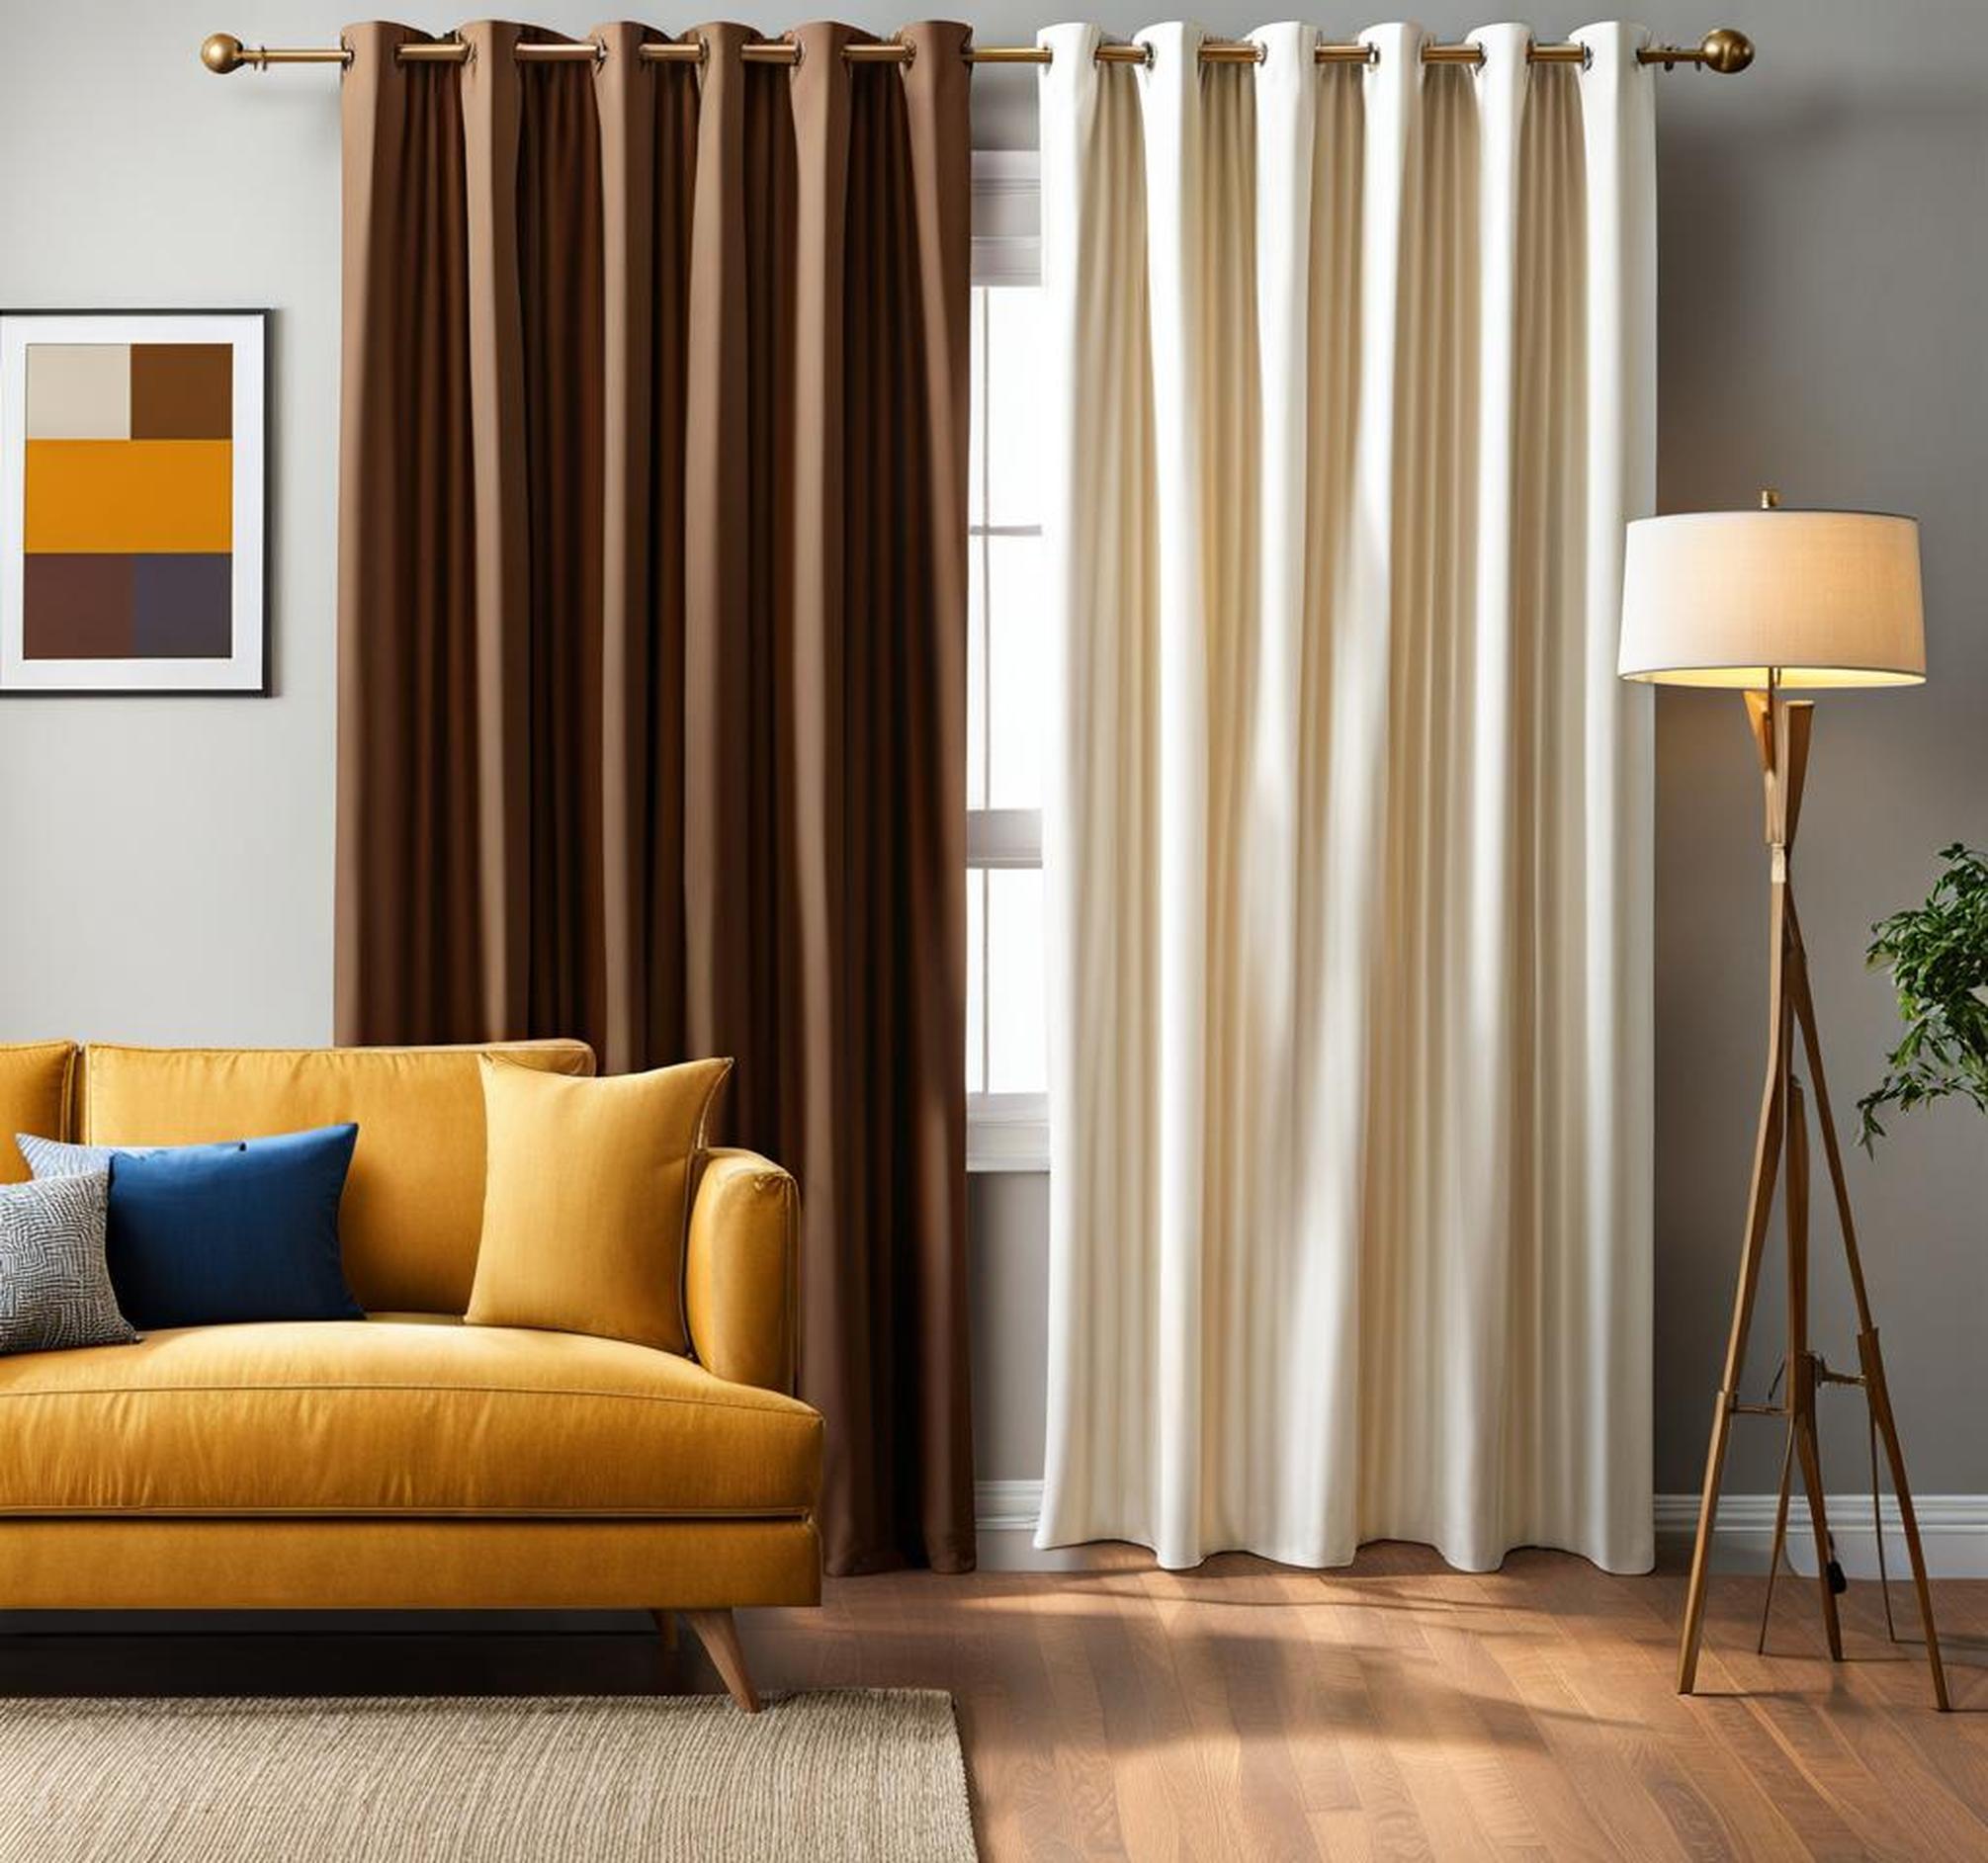 cool curtains for guys